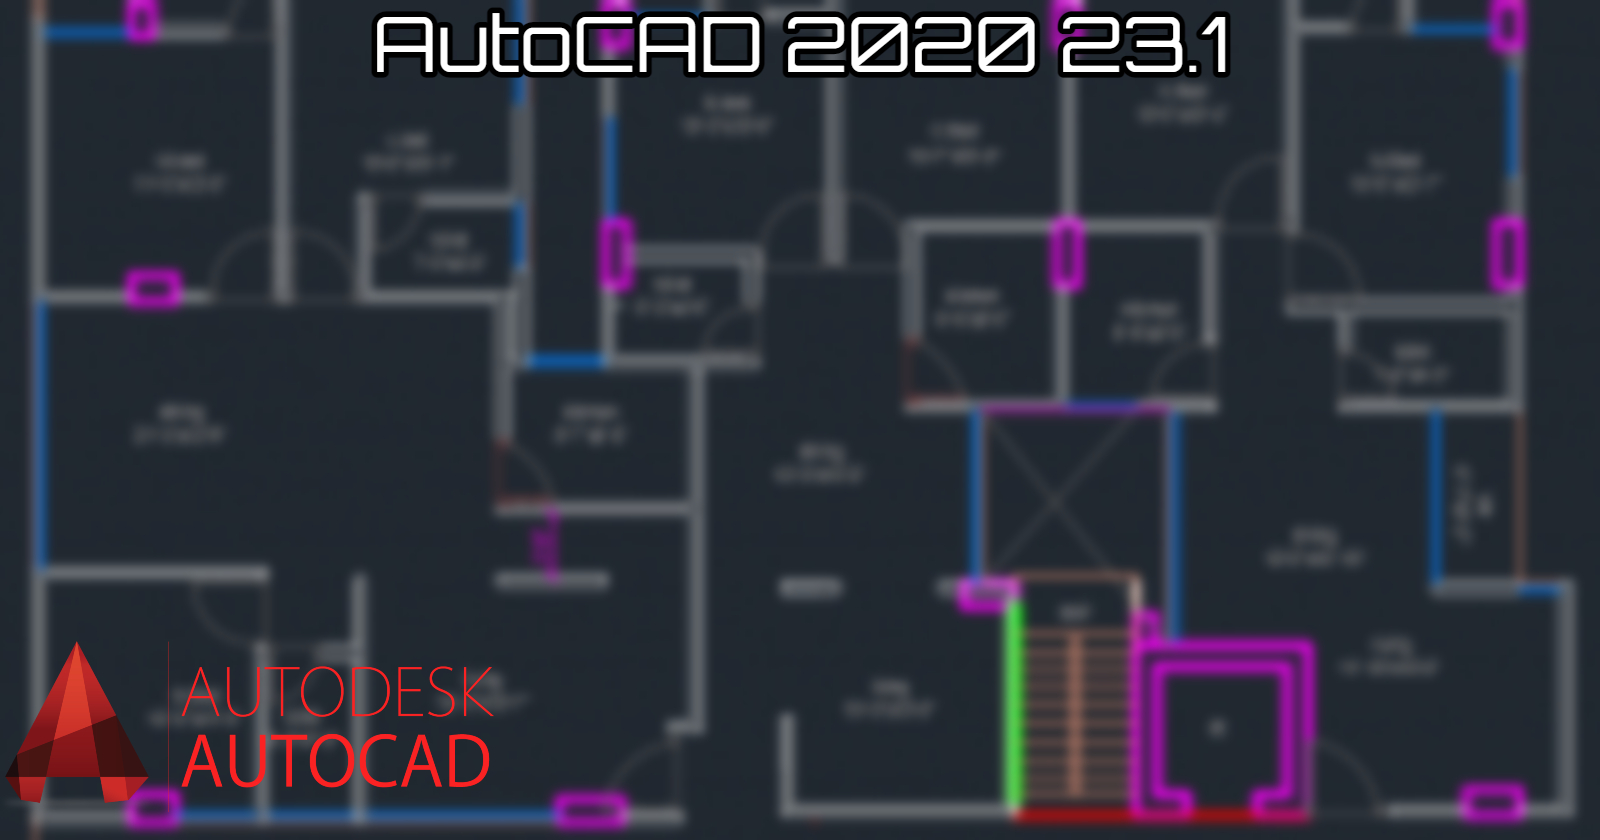 Read more about the article AutoCAD 2020 23.1